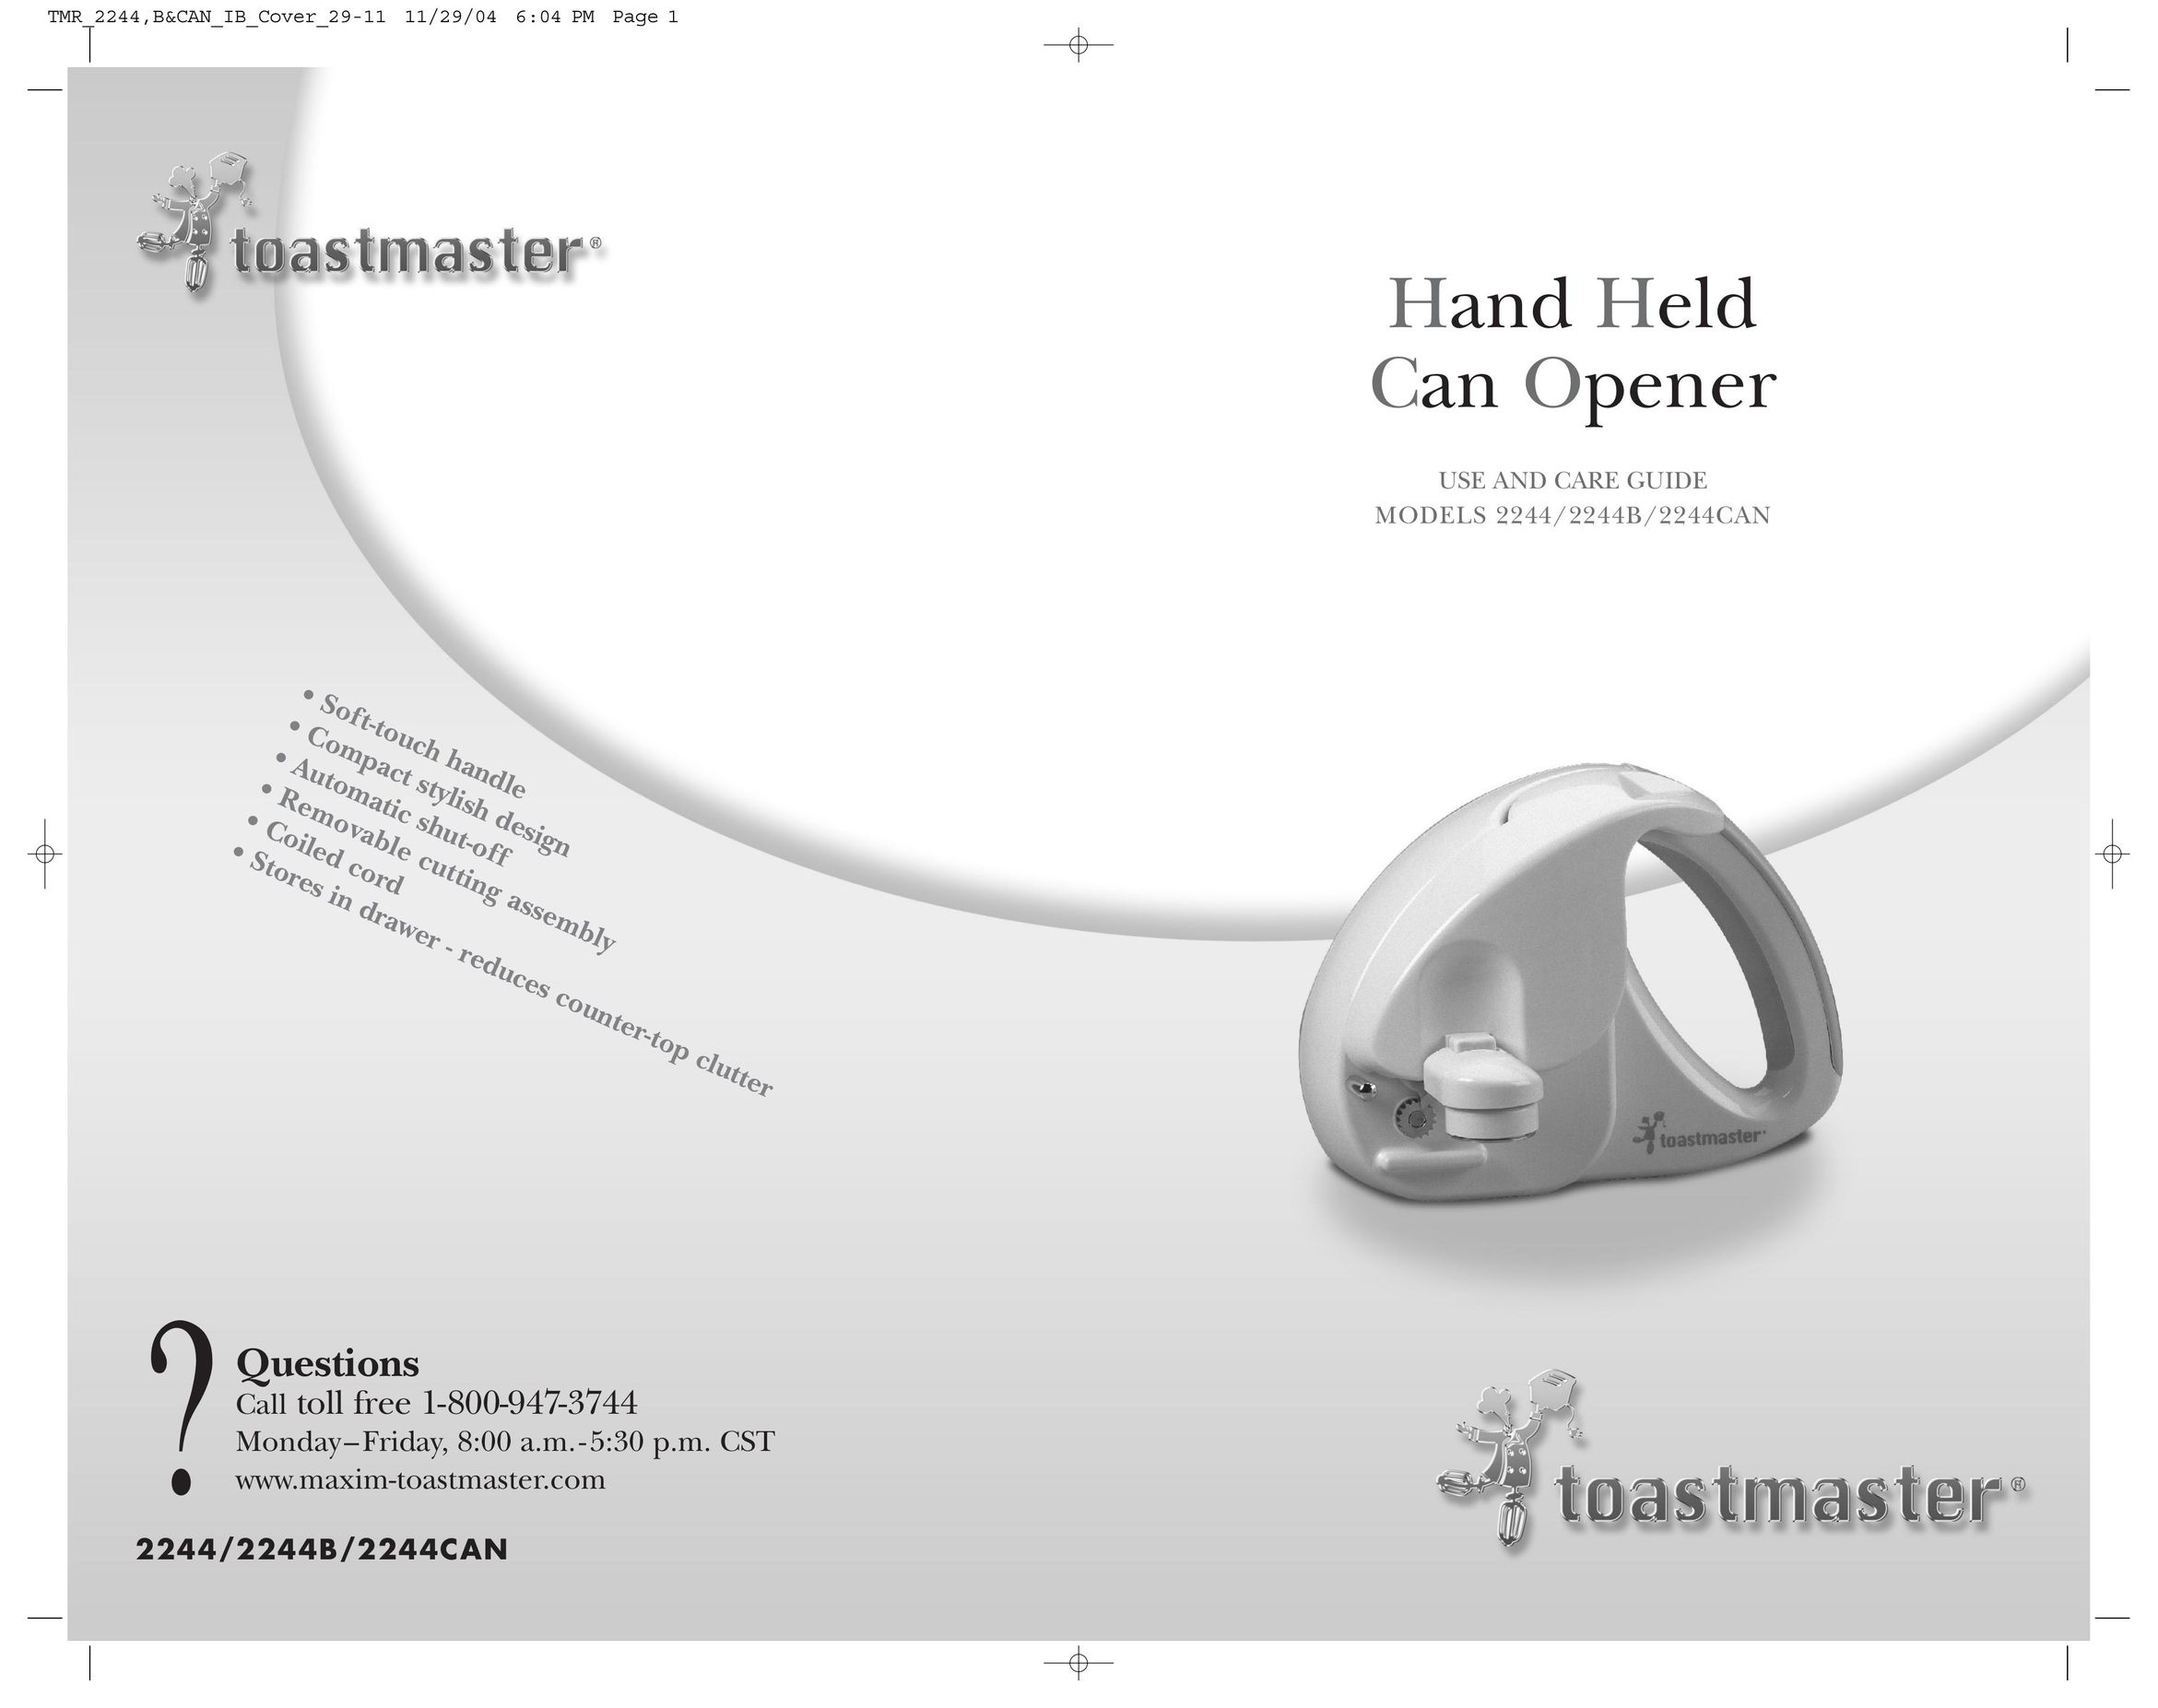 Toastmaster 2244B Can Opener User Manual